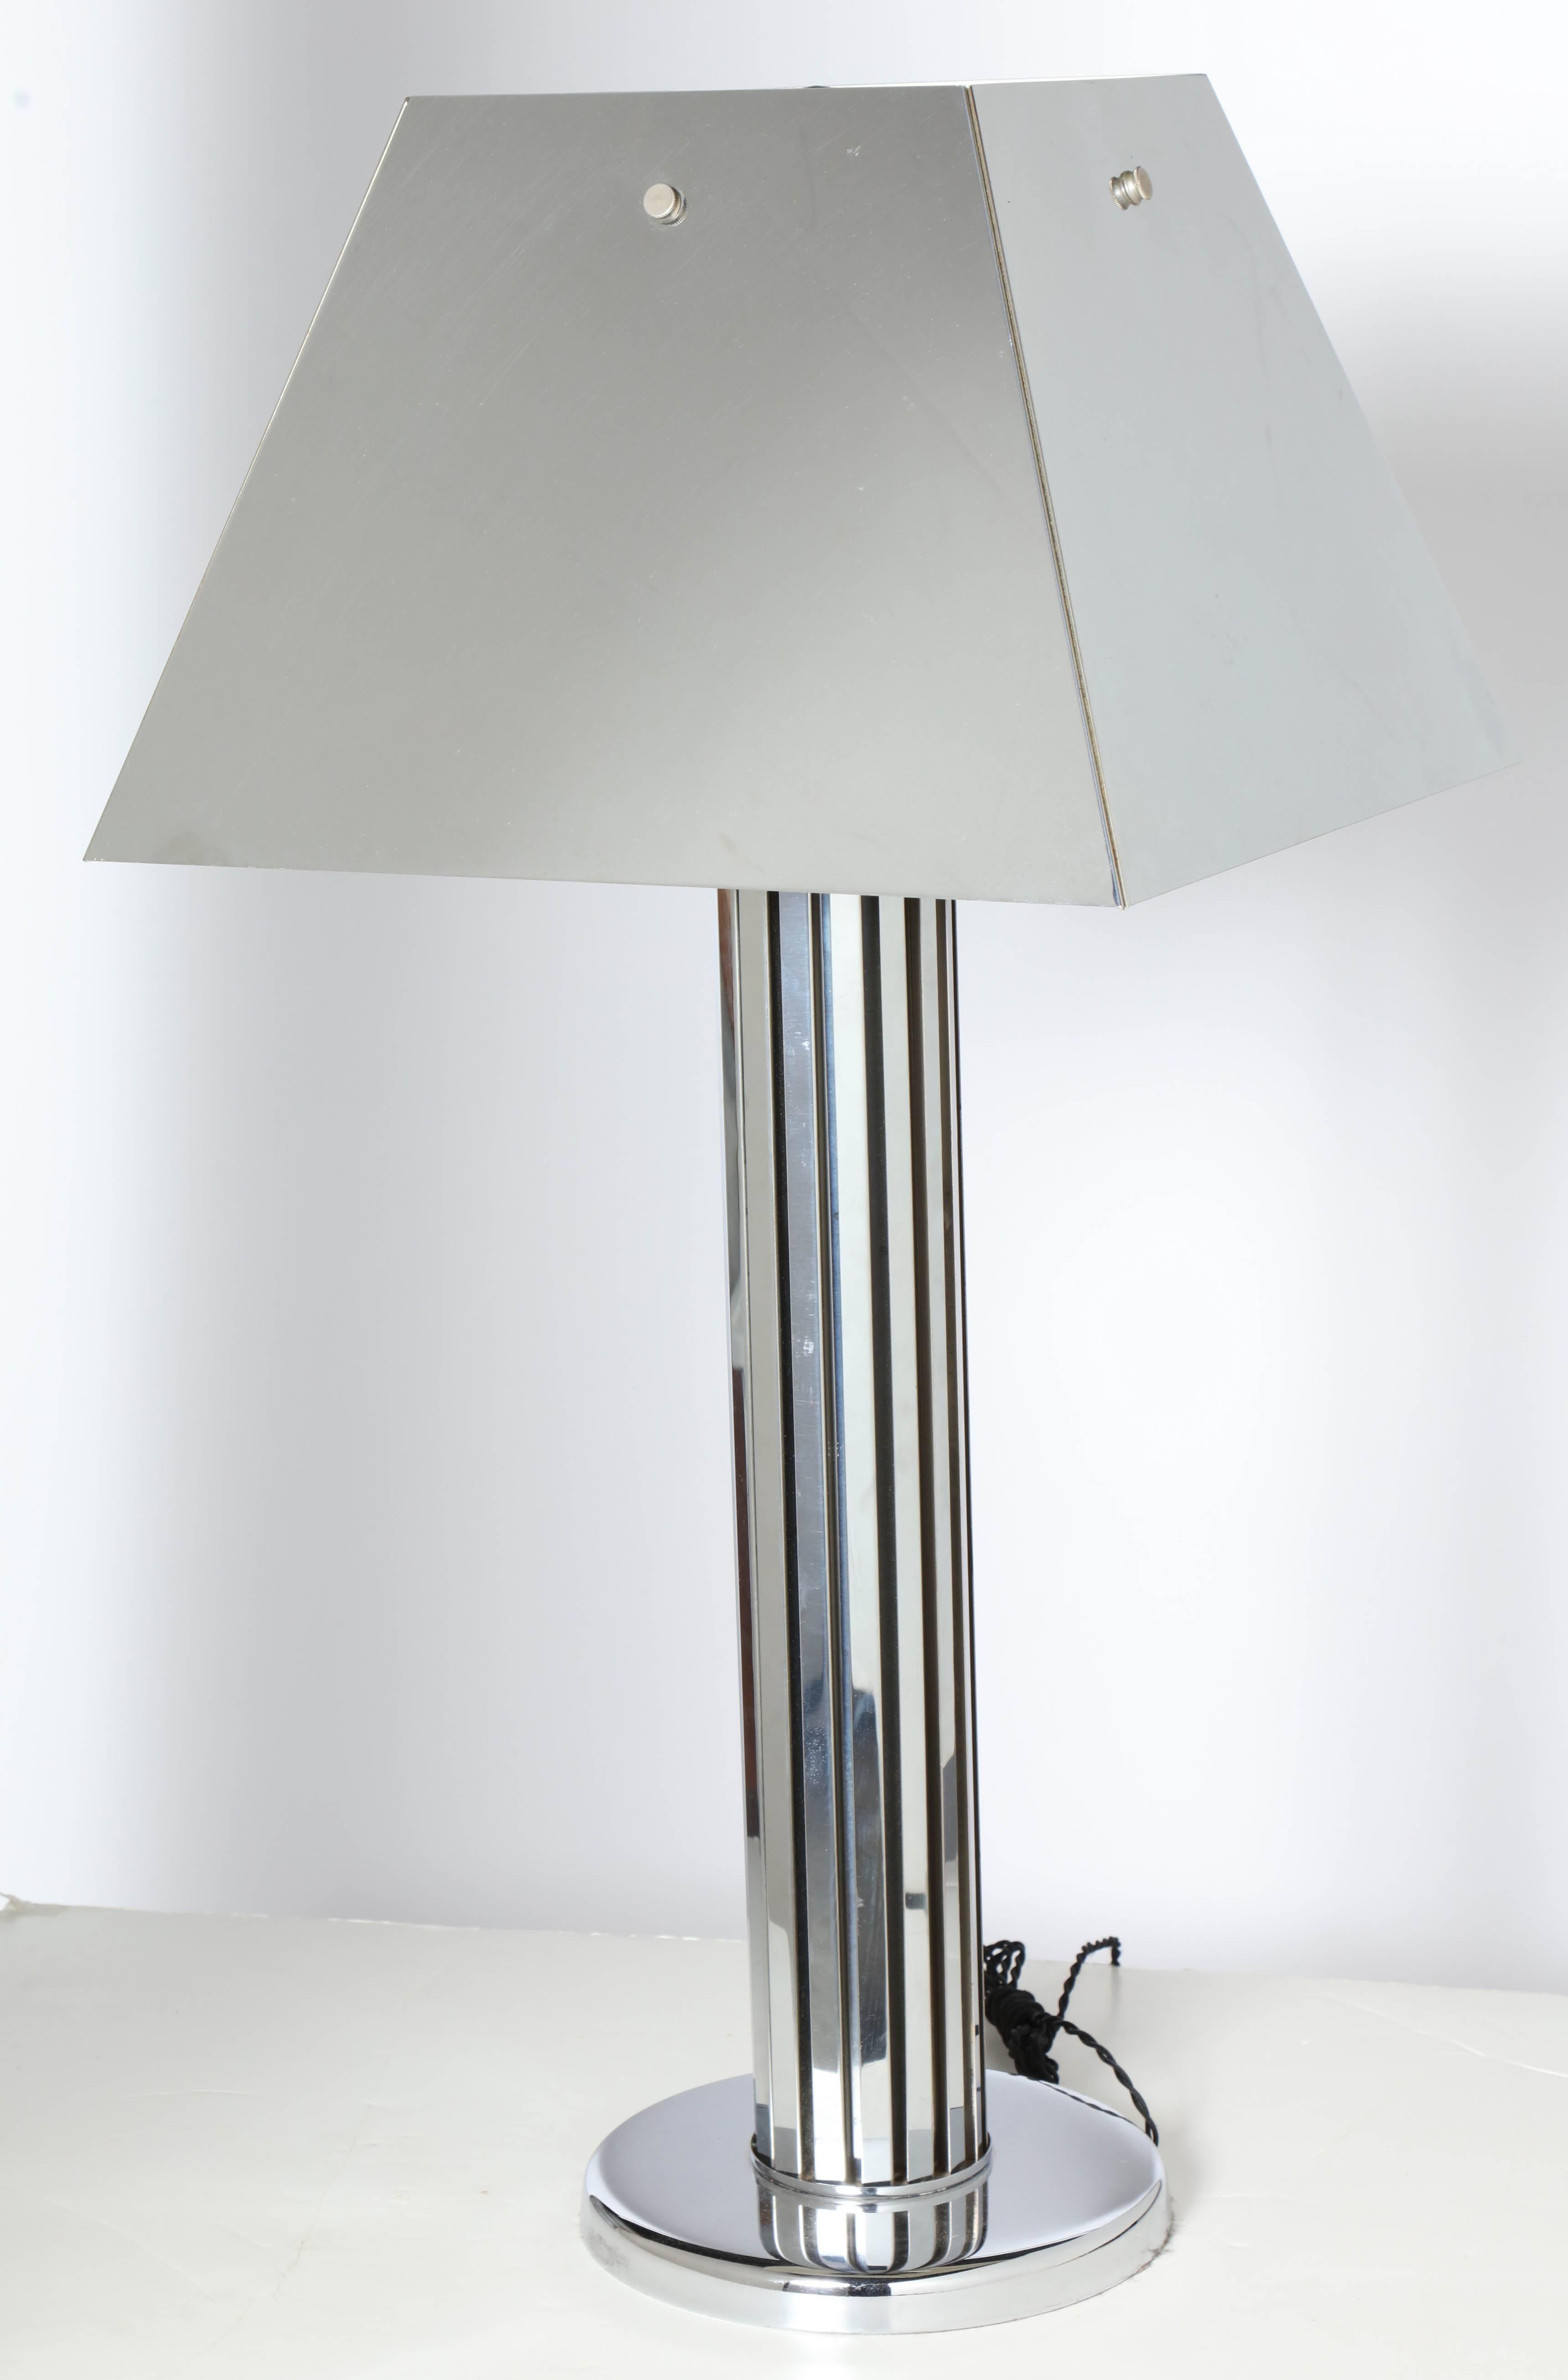 Substantial Curtis Jere Modern, Architectural All Chrome Table Lamp with Square Chrome Shade, Early 1970's. Featuring a Chrome-plated Steel Shade, paneled cylindrical central column and round 10D Chrome base. Sculptural. Dimensional. Statement